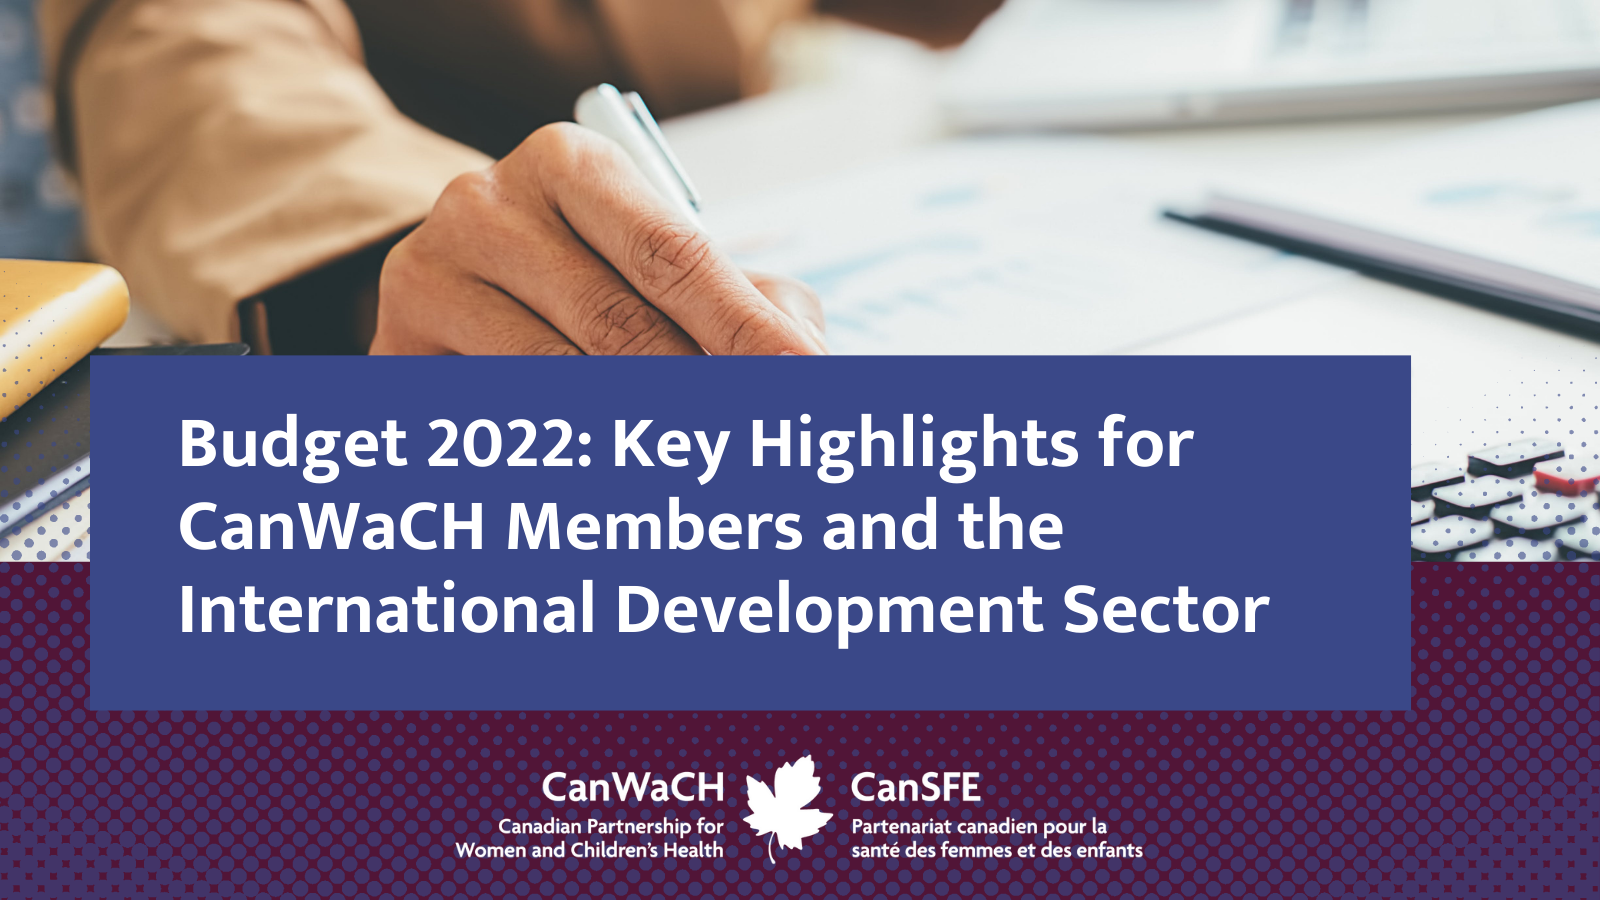 Budget 2022: Key Highlights for CanWaCH Members and the International Development Sector